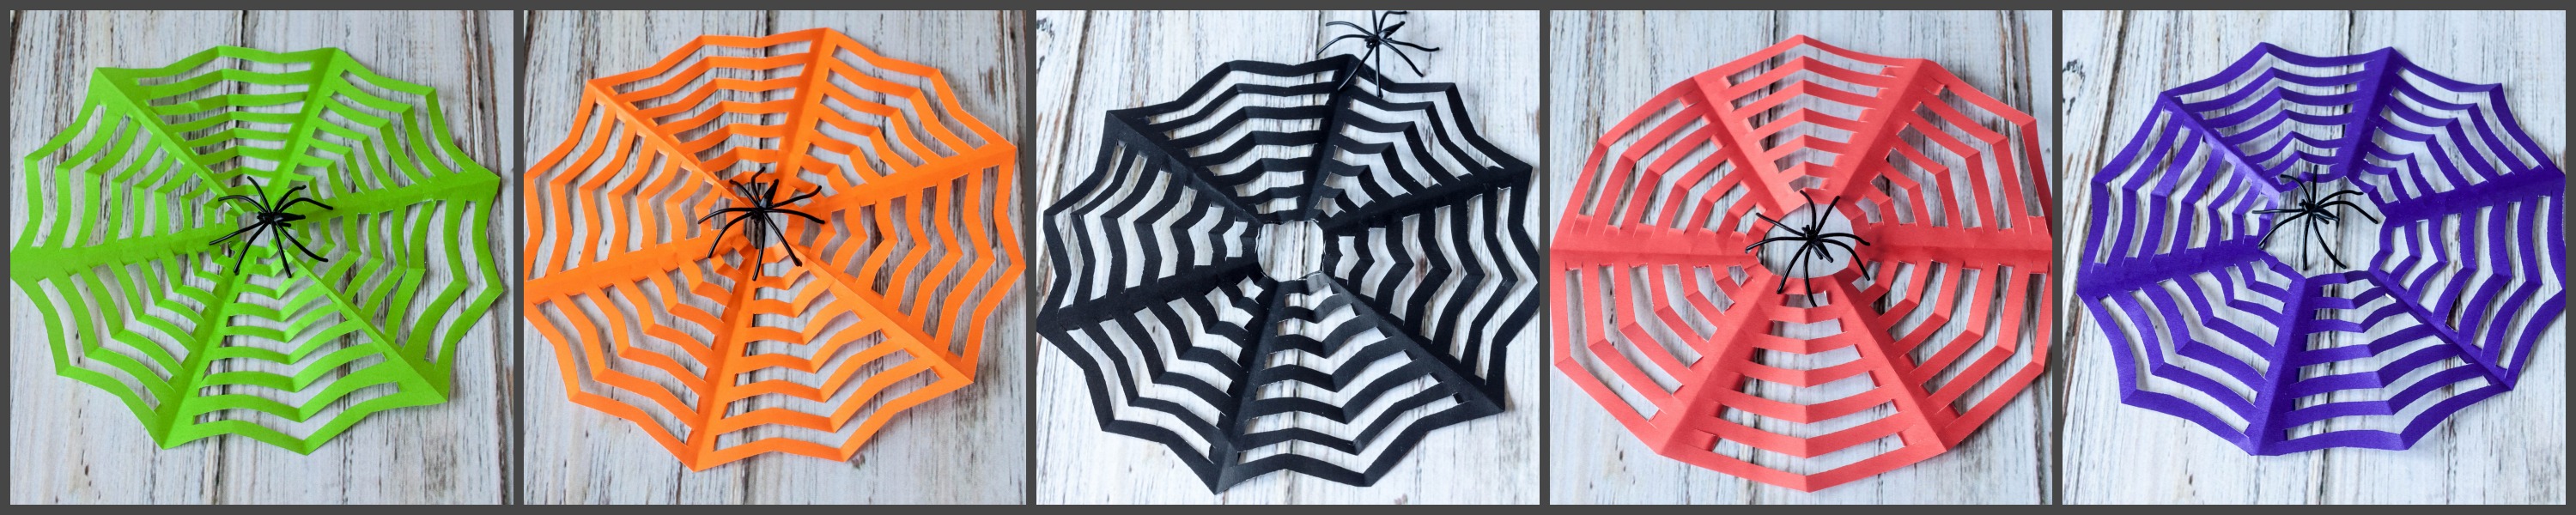 Kirigami Spider Webs for Halloween - So easy to make! Great for garland, gifts and decorations!